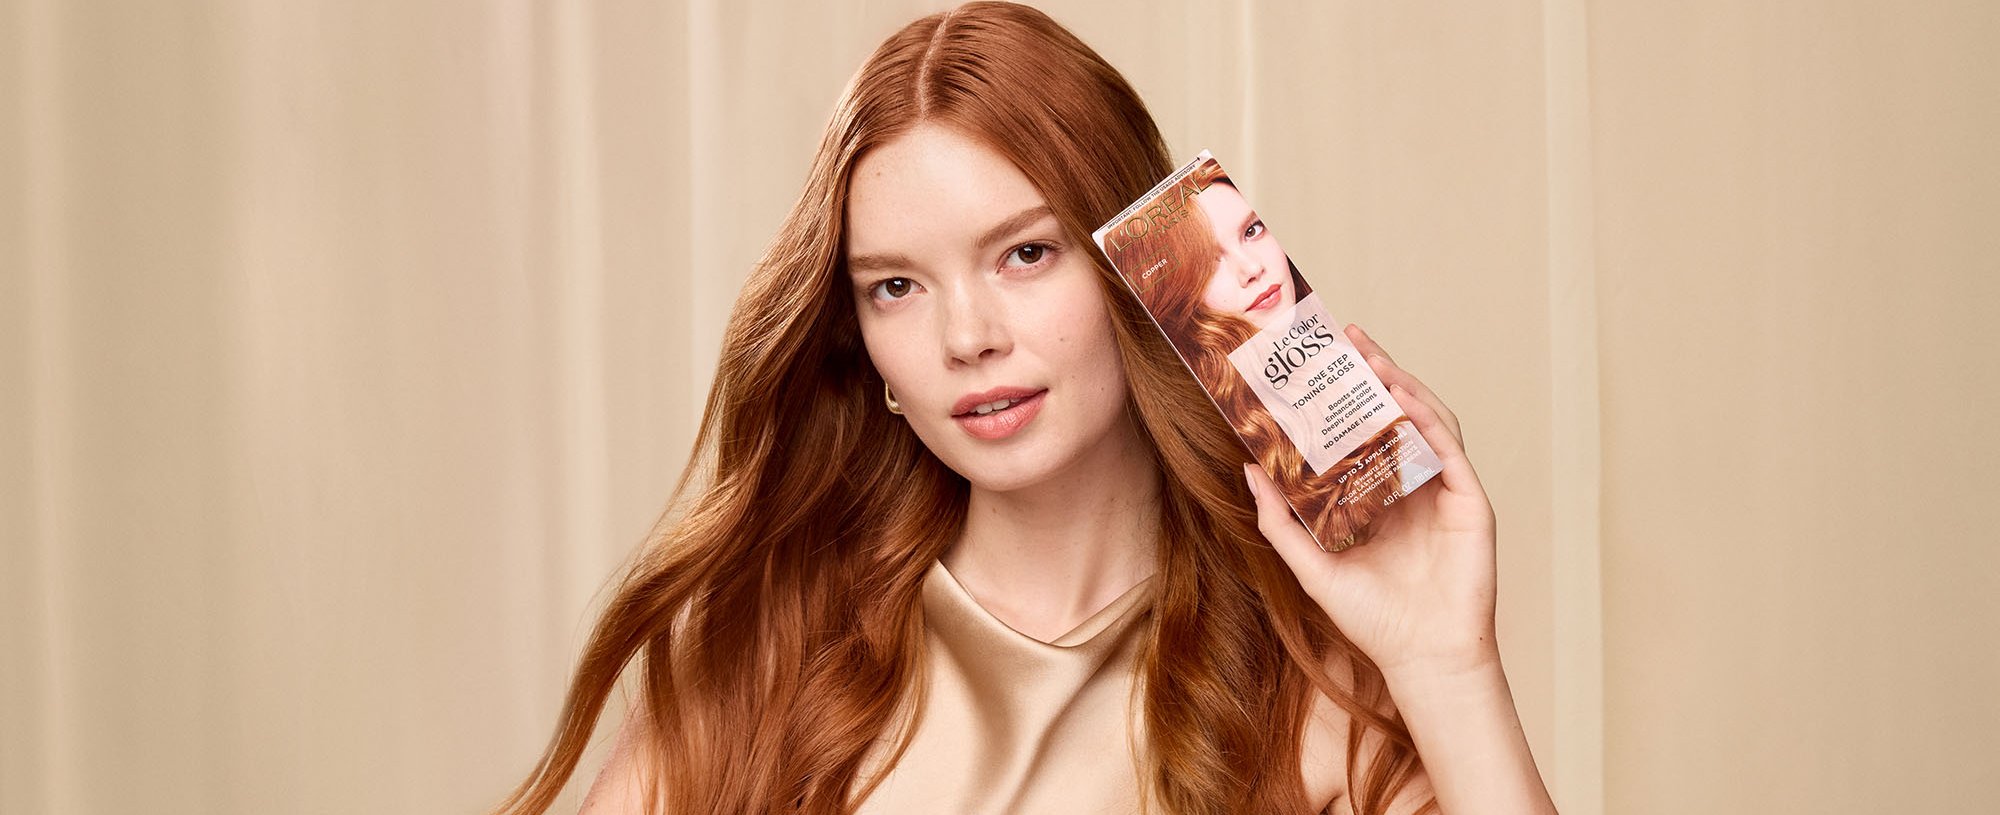 5 Things You Should Know Before Coloring Your Hair Red This Valentine's Day